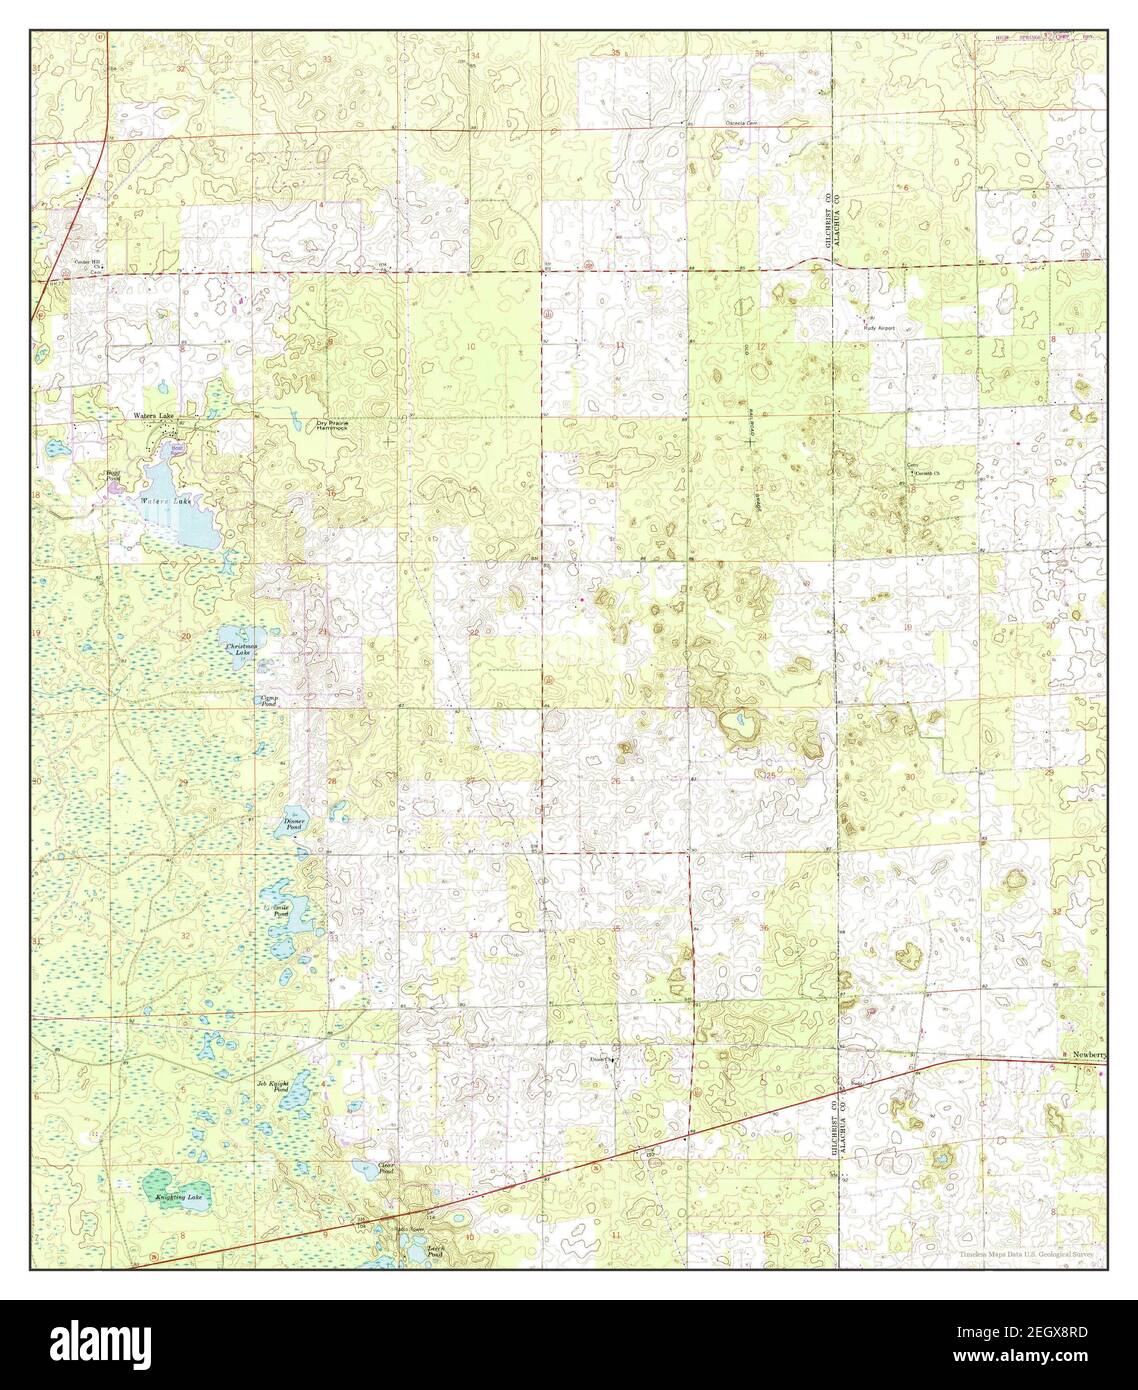 Waters Lake, Florida, map 1968, 1:24000, United States of America by Timeless Maps, data U.S. Geological Survey Stock Photo